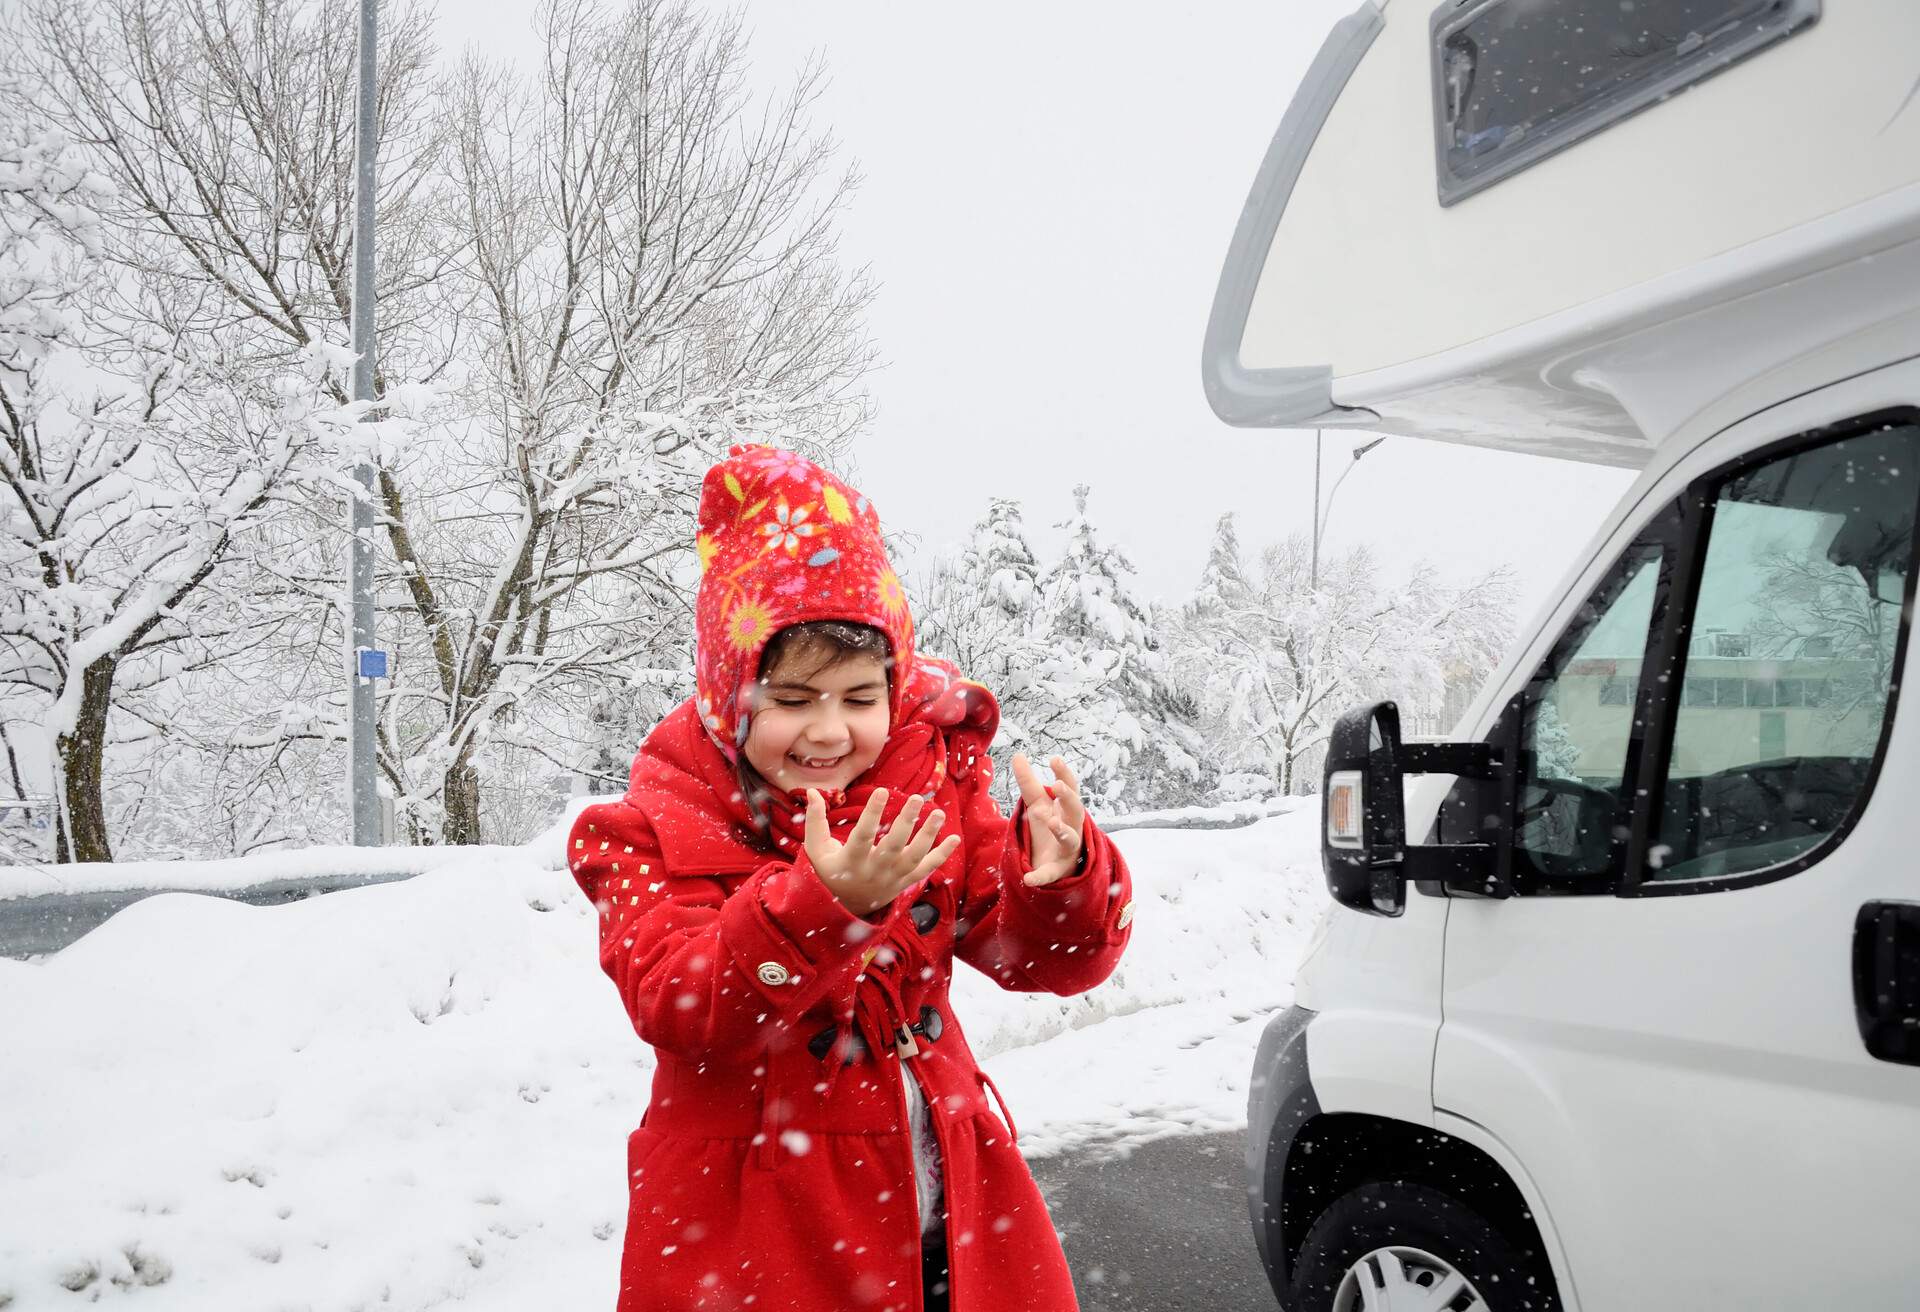 A young girl in a red coat and winter hat catching falling snowflakes next to a white campervan.